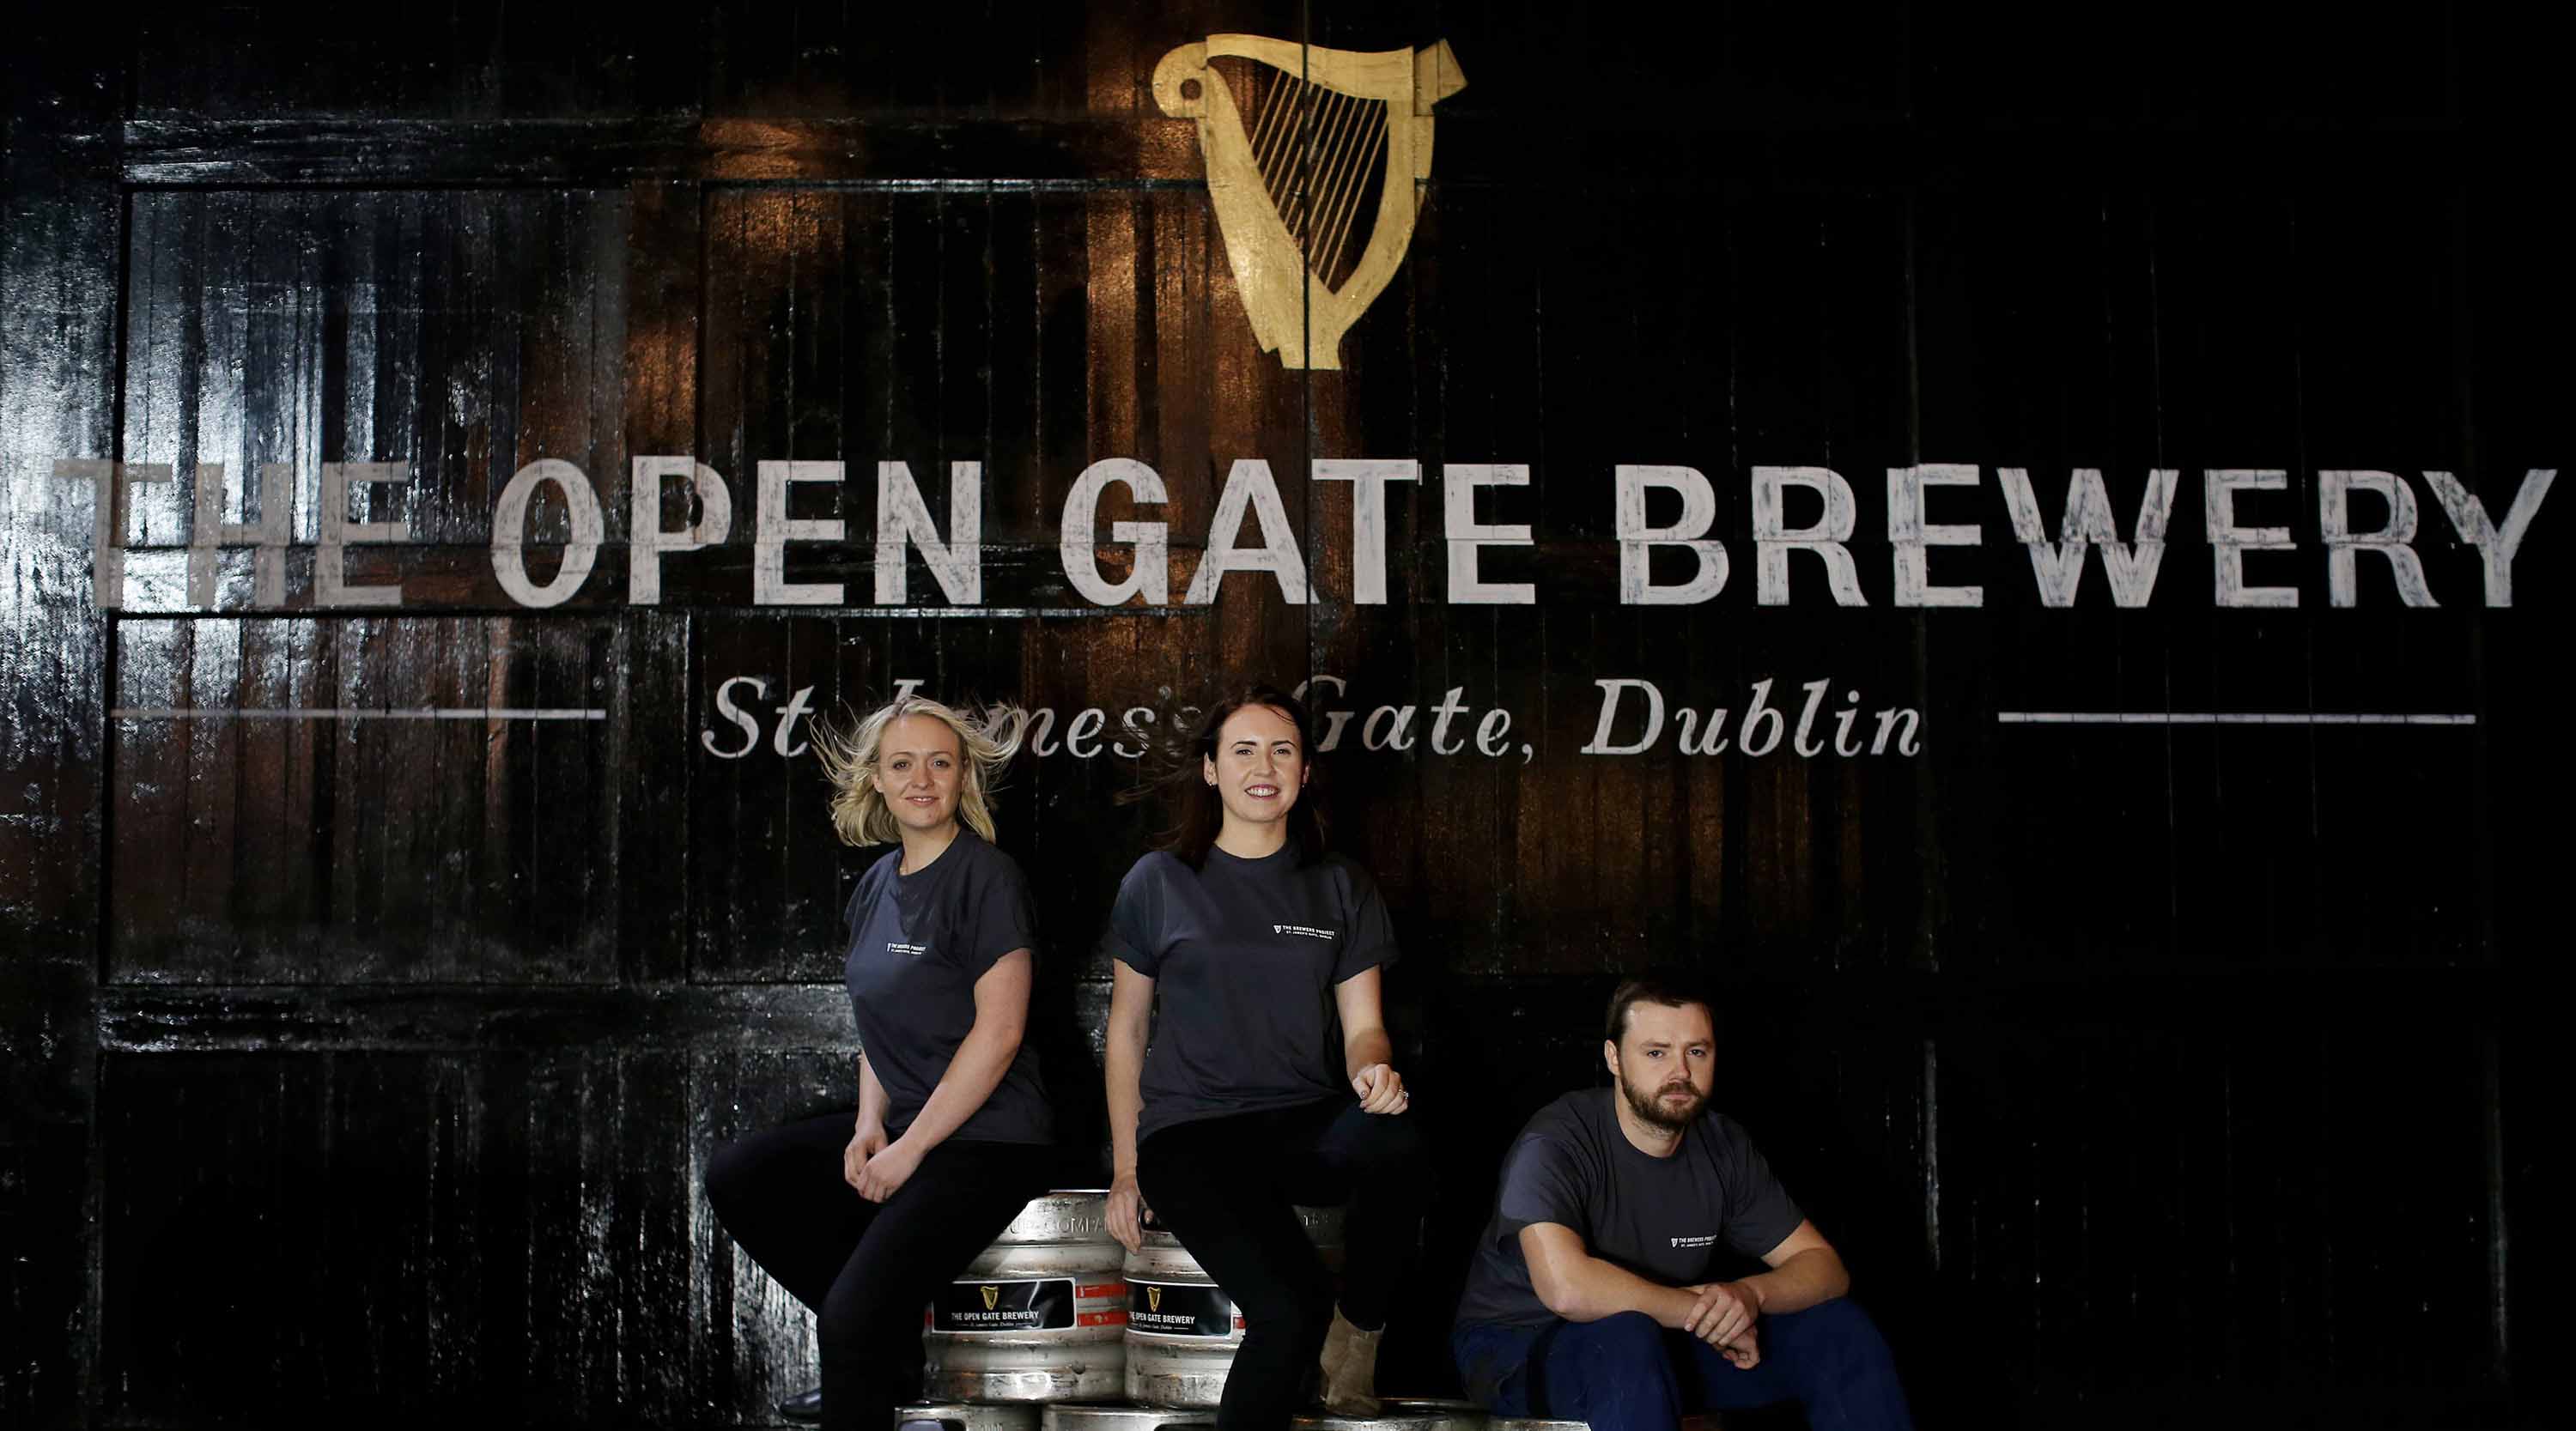 At the launch of The Open Gate Brewery at St James’s Gate, Dublin, is (from left) :Jason Carroll, Feodora Heavey and Aisling Ryan.